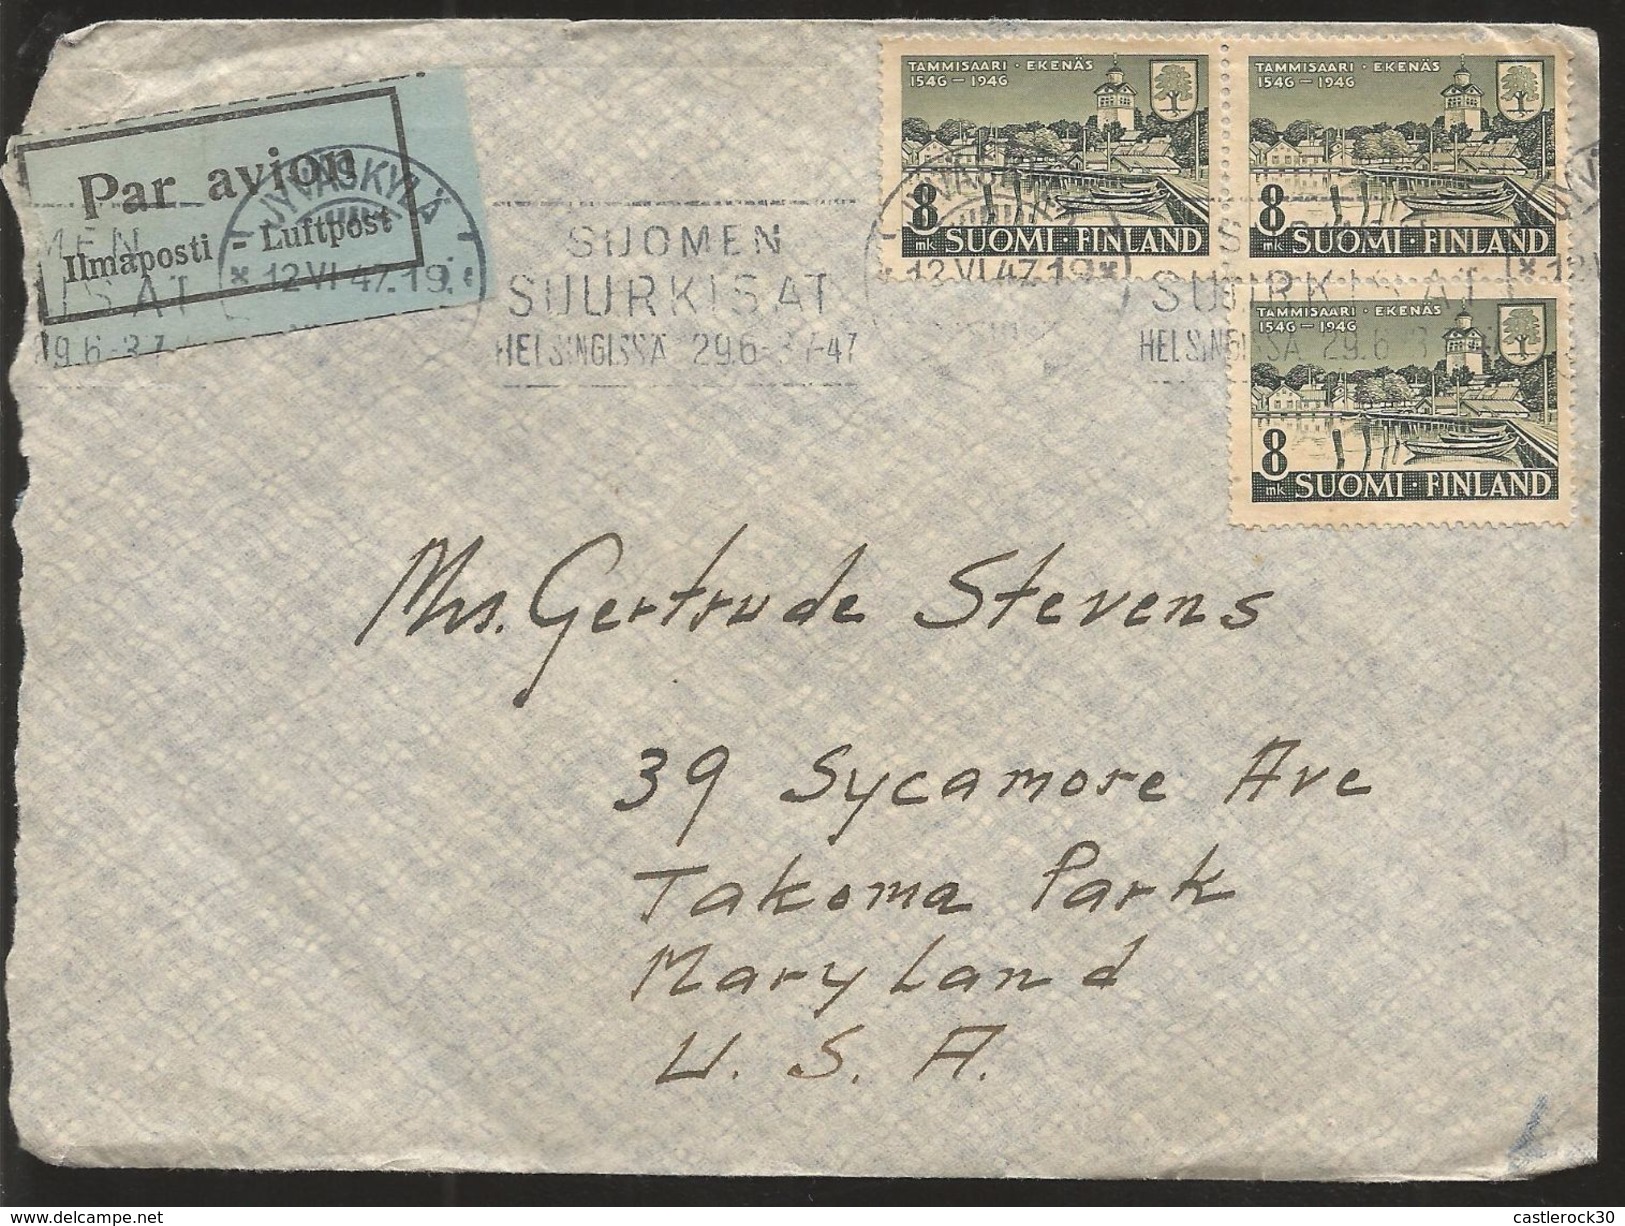 A) 1947 FINLAND, TOWN OF TAMISAARI, SEA, ARCHITECTURE, BOAT, CIRCULATED COVER FROM FINLAND TO USA. - Gebruikt